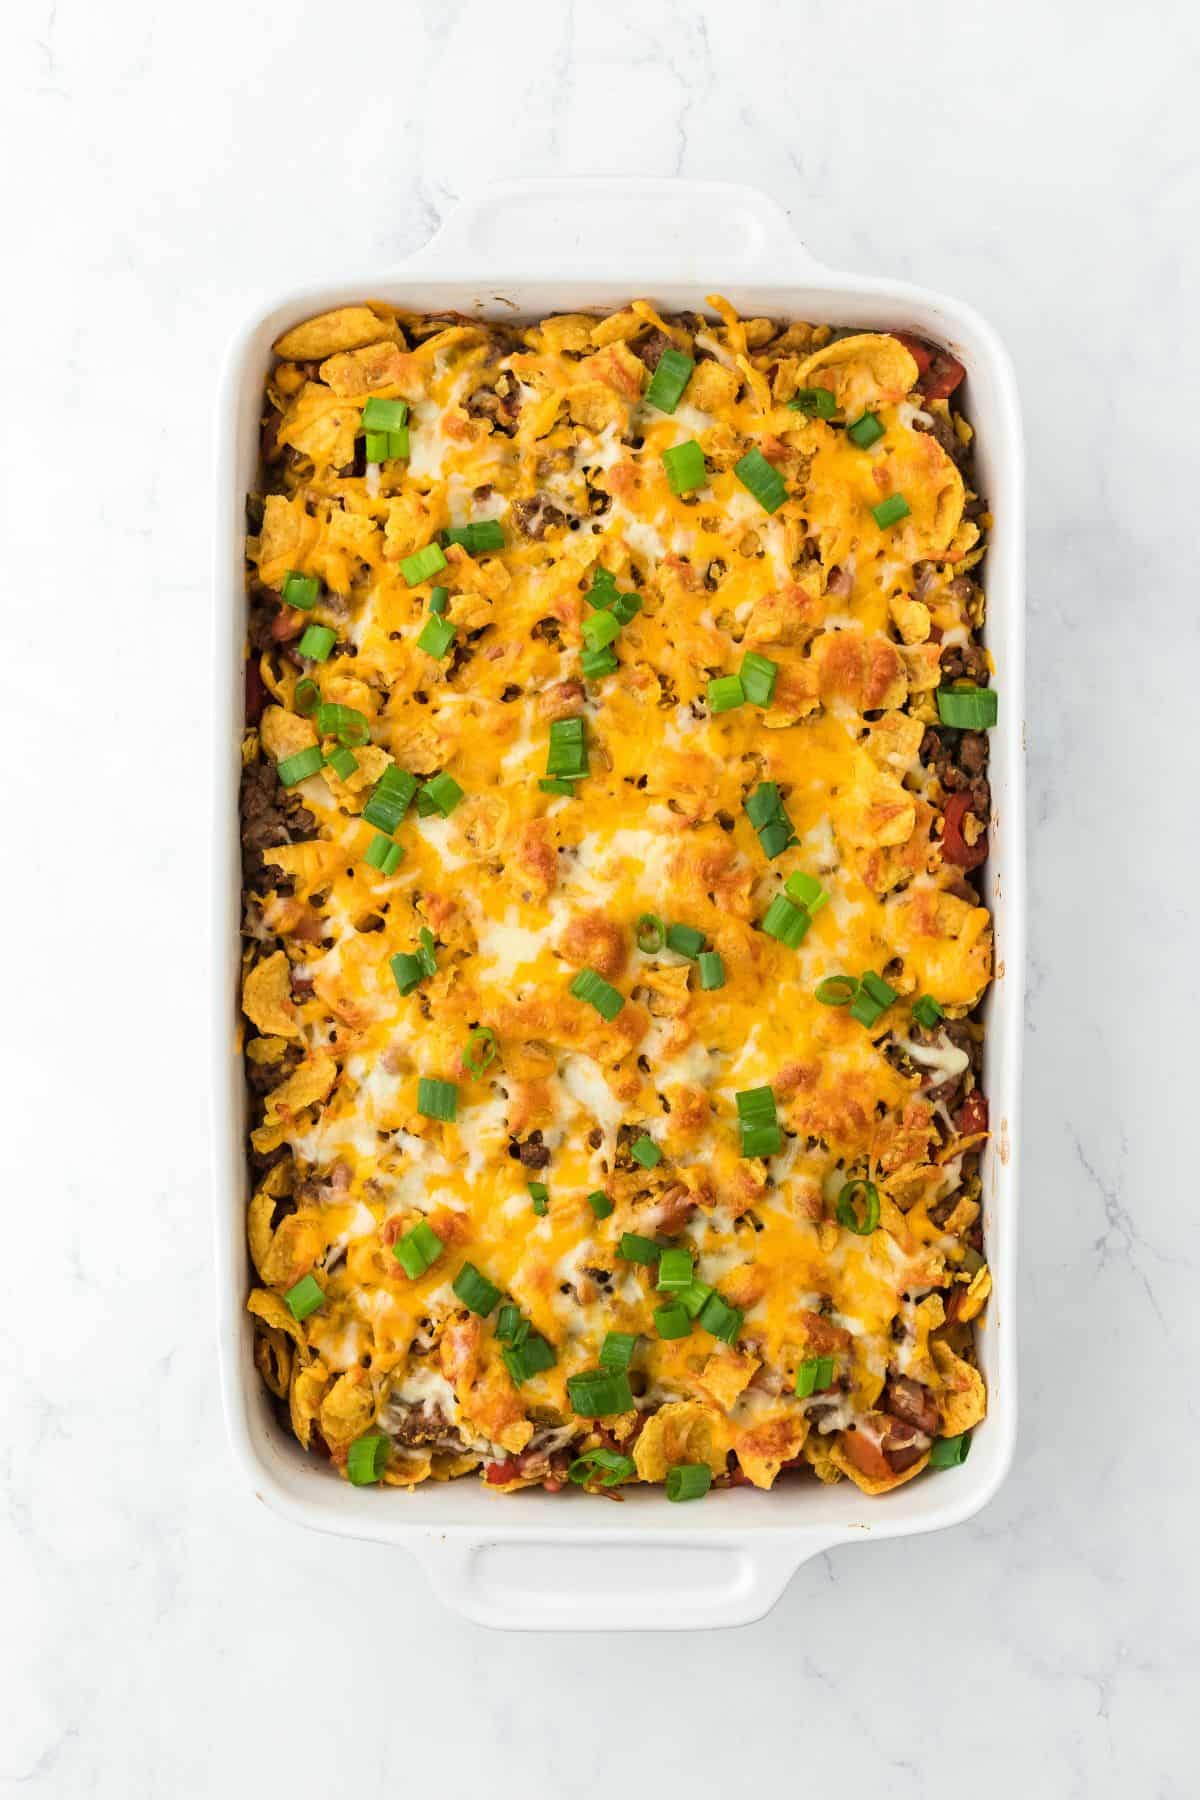 Overhead shot of a baked Frito pie in a casserole dish, topped with melted cheese, Fritos corn chips, and chopped green onions. A bowl of Fritos, a fork, a spoon, and fresh cilantro are placed nearby